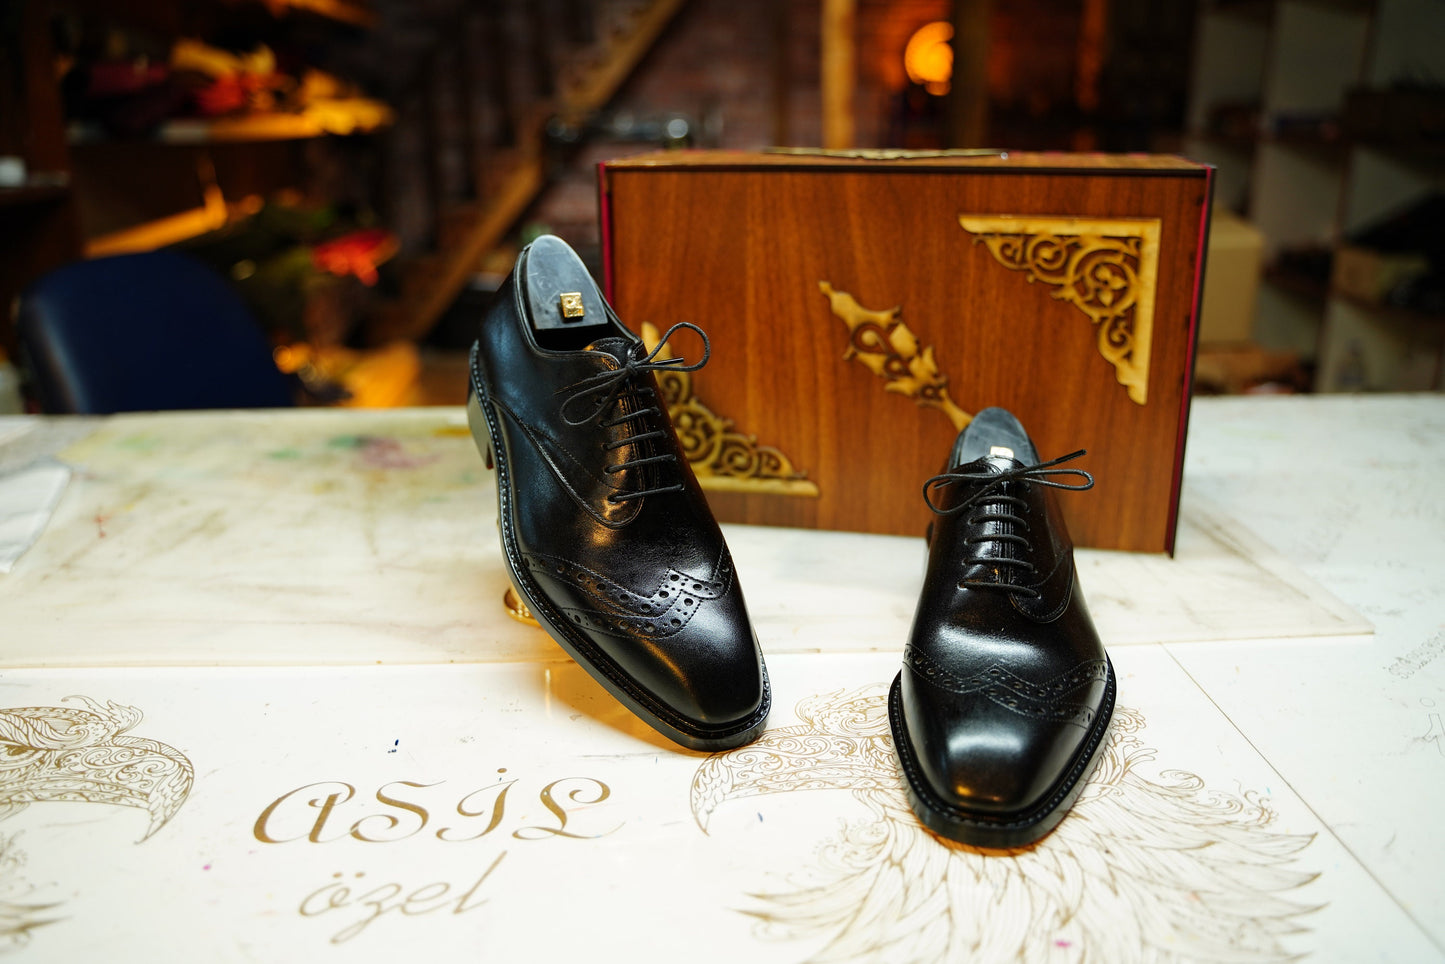 Oxford Shoes Black Leather For Men, Handcraft Embossed Lace Up Shoes, Made To Order Shoes,Suit Shoes For Men, Dress Shoes, Gift Shoe For Men